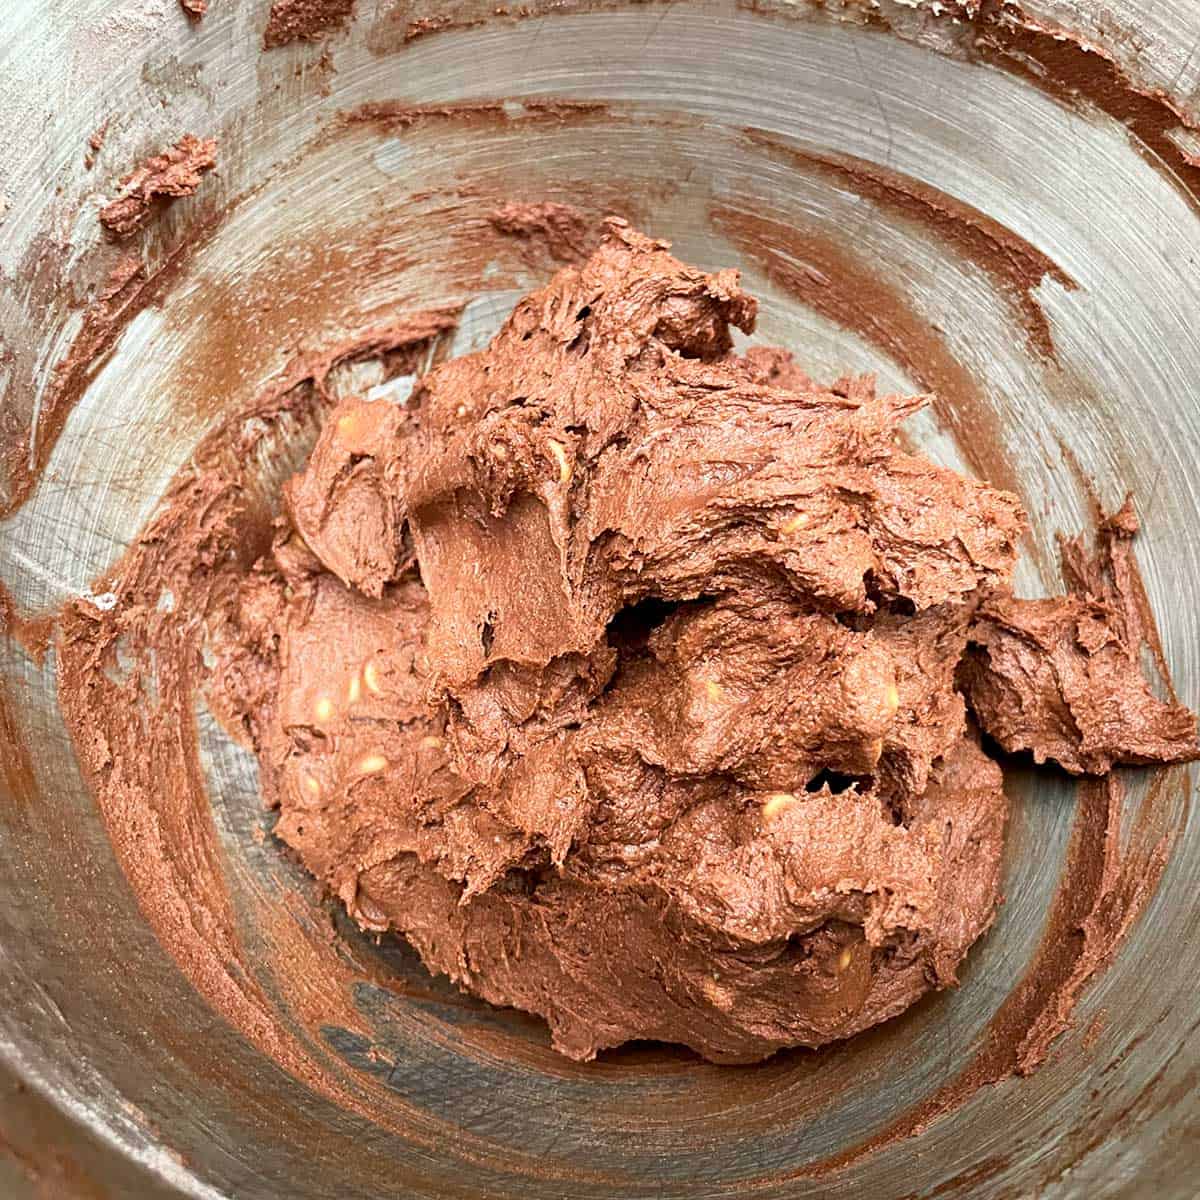 Chocolate cookie dough with peanut butter and chocolate chips mixed in a mixer bowl.